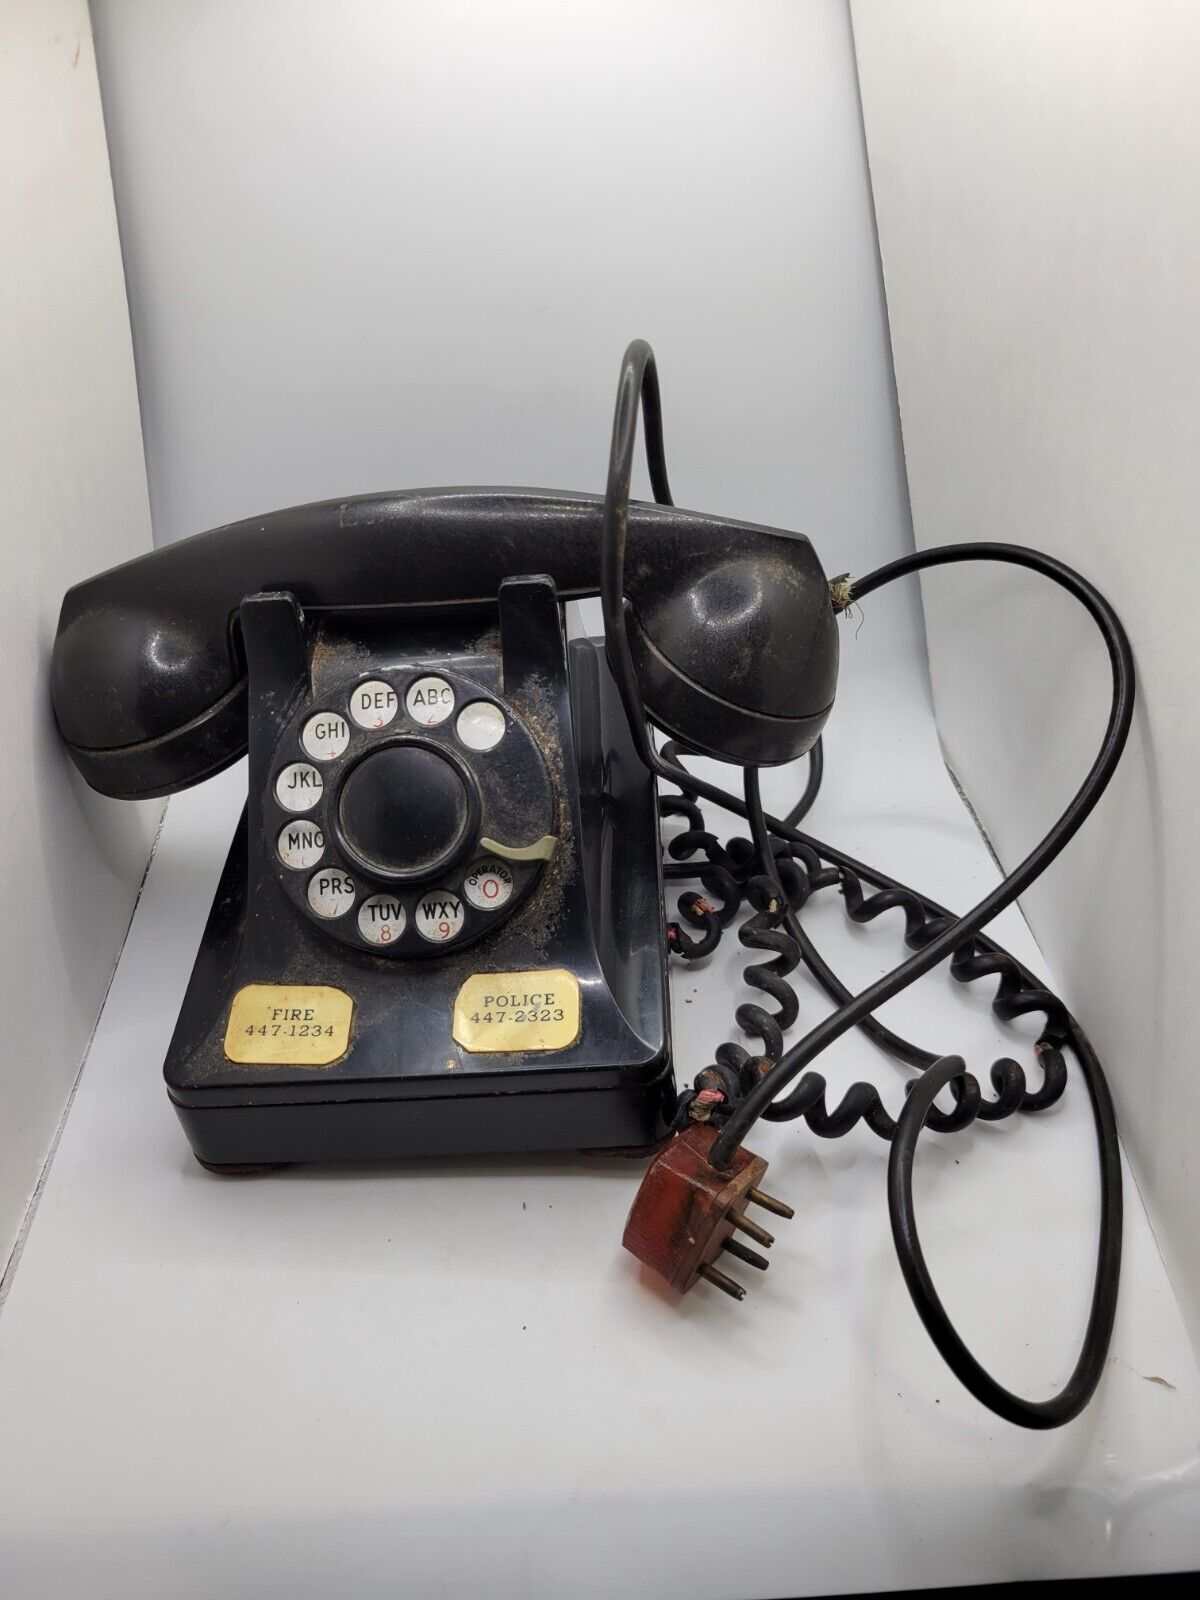 Antique Telephone Western Electric Company Model 302 Made in the USA, 1930s